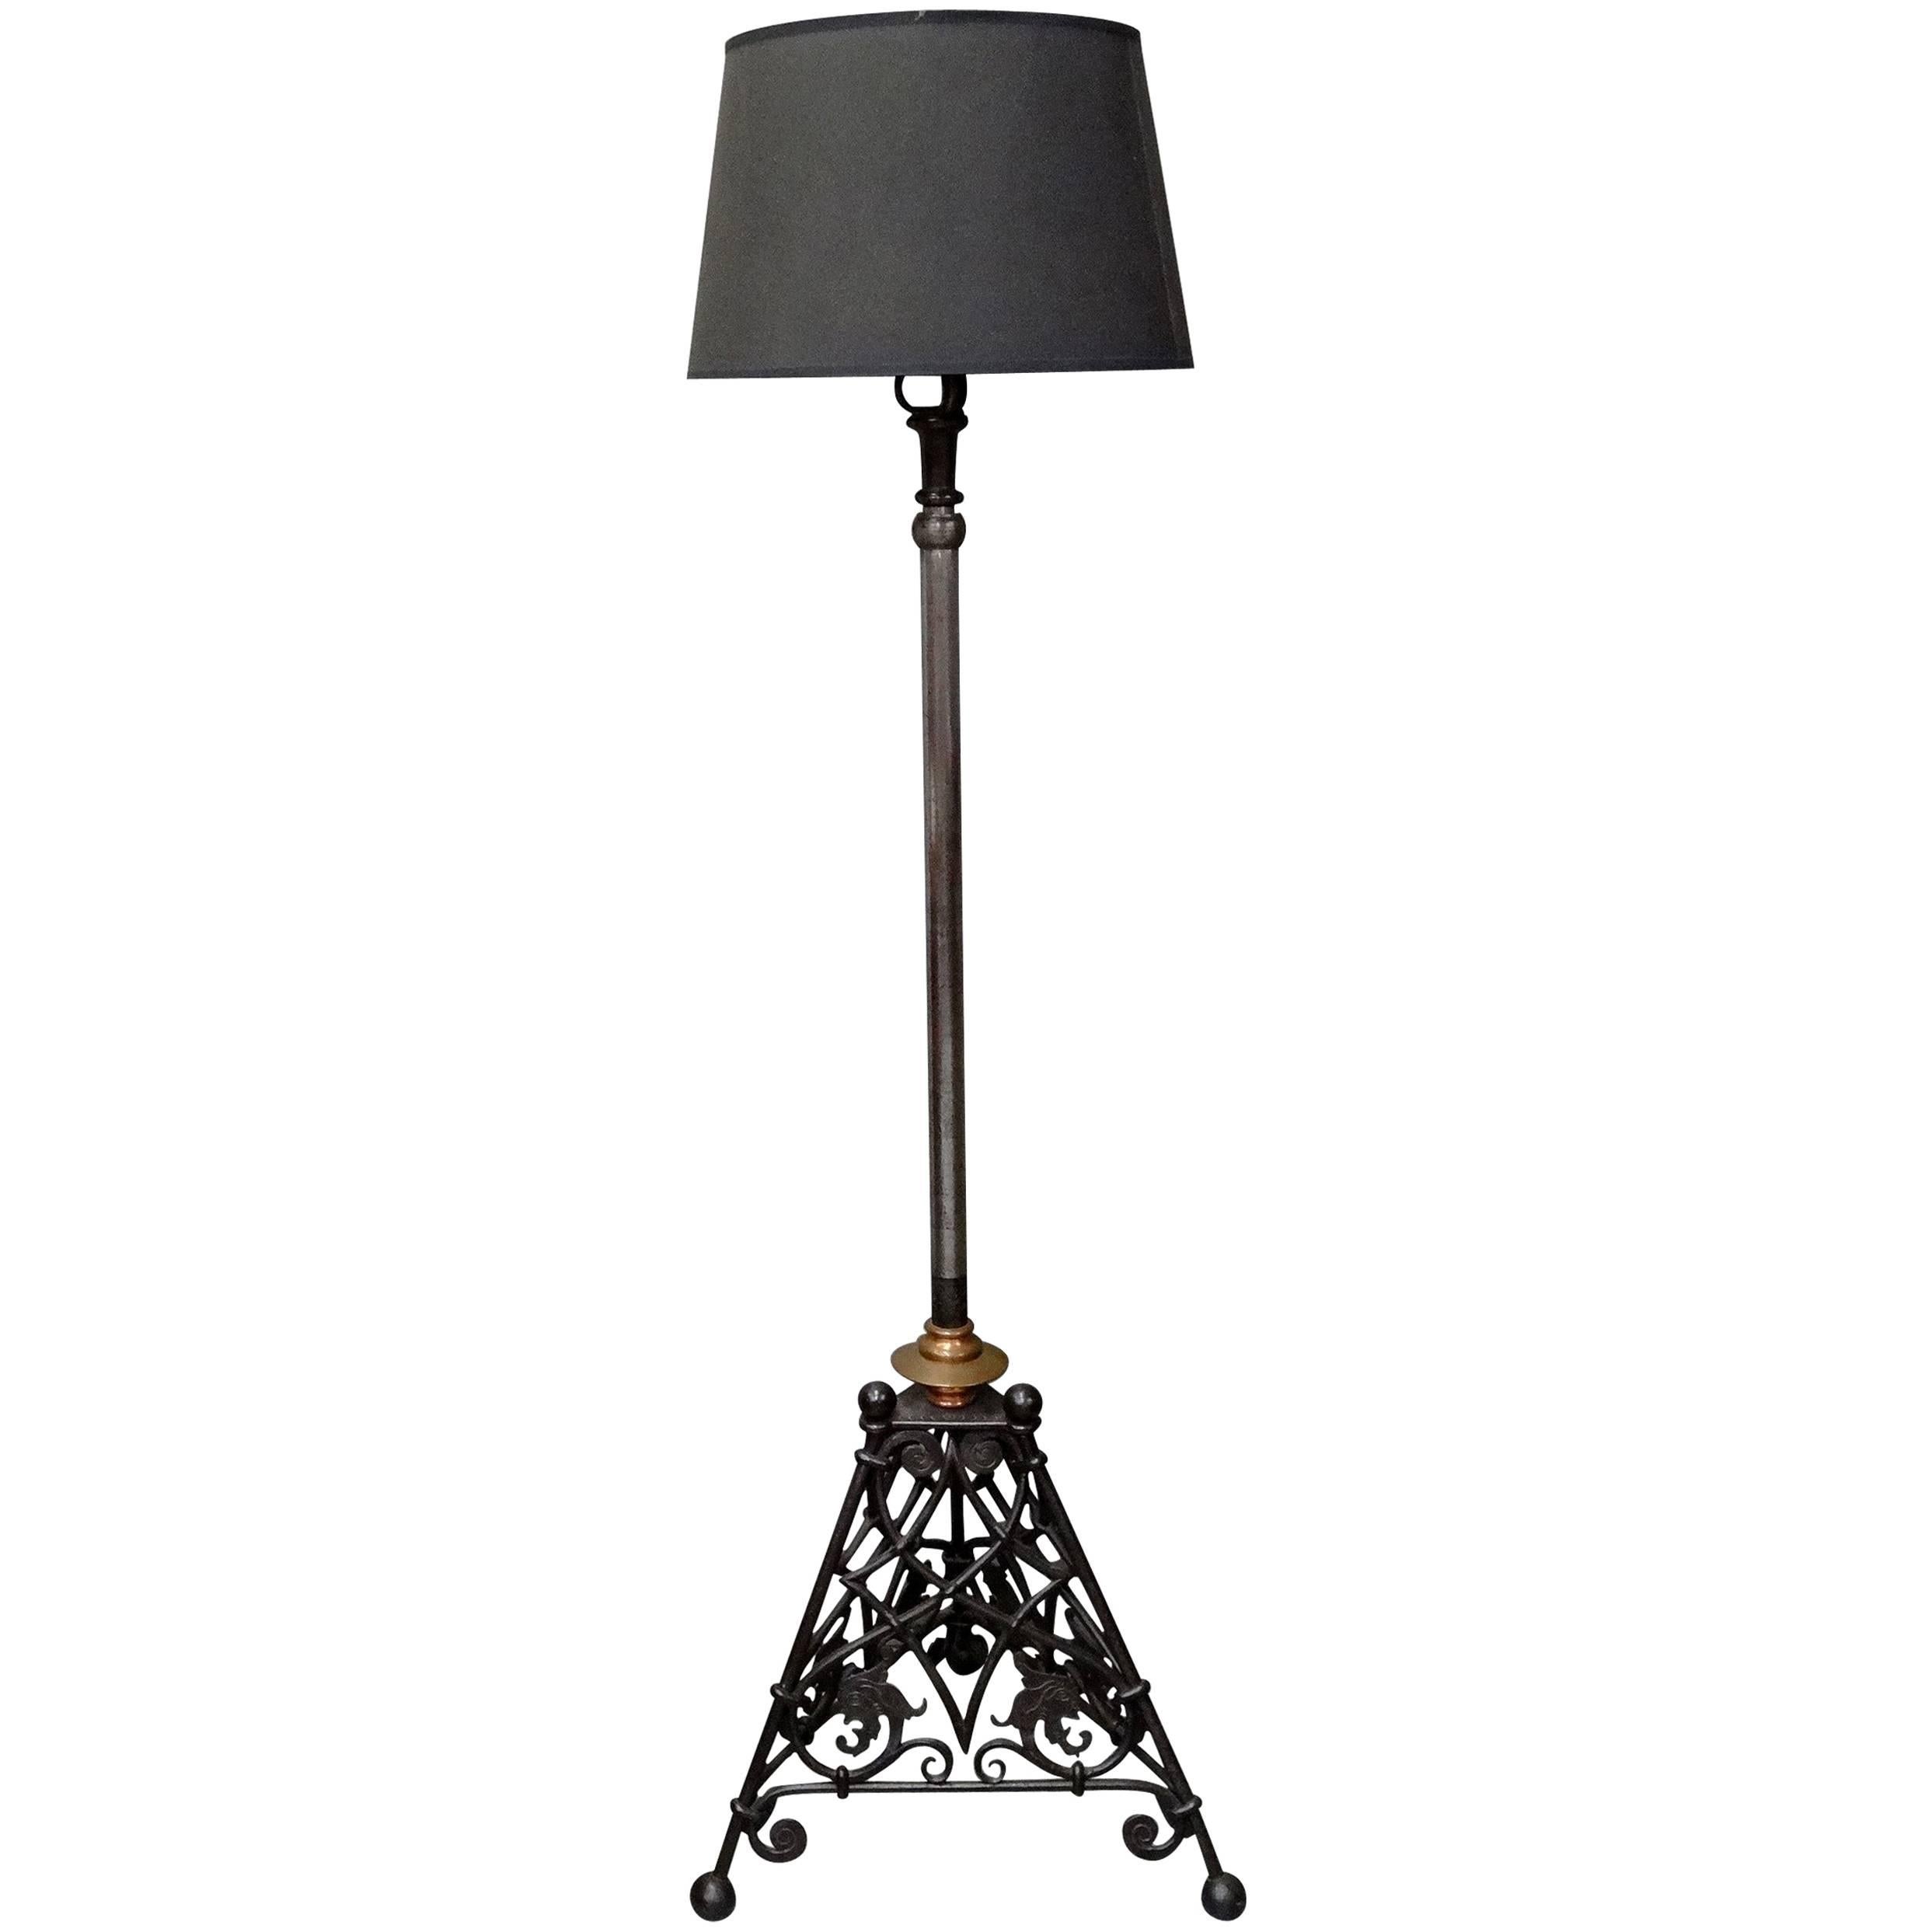 CFA Voysey Rare Arts & Crafts Iron Steel and Copper Extendable Standard Lamp For Sale